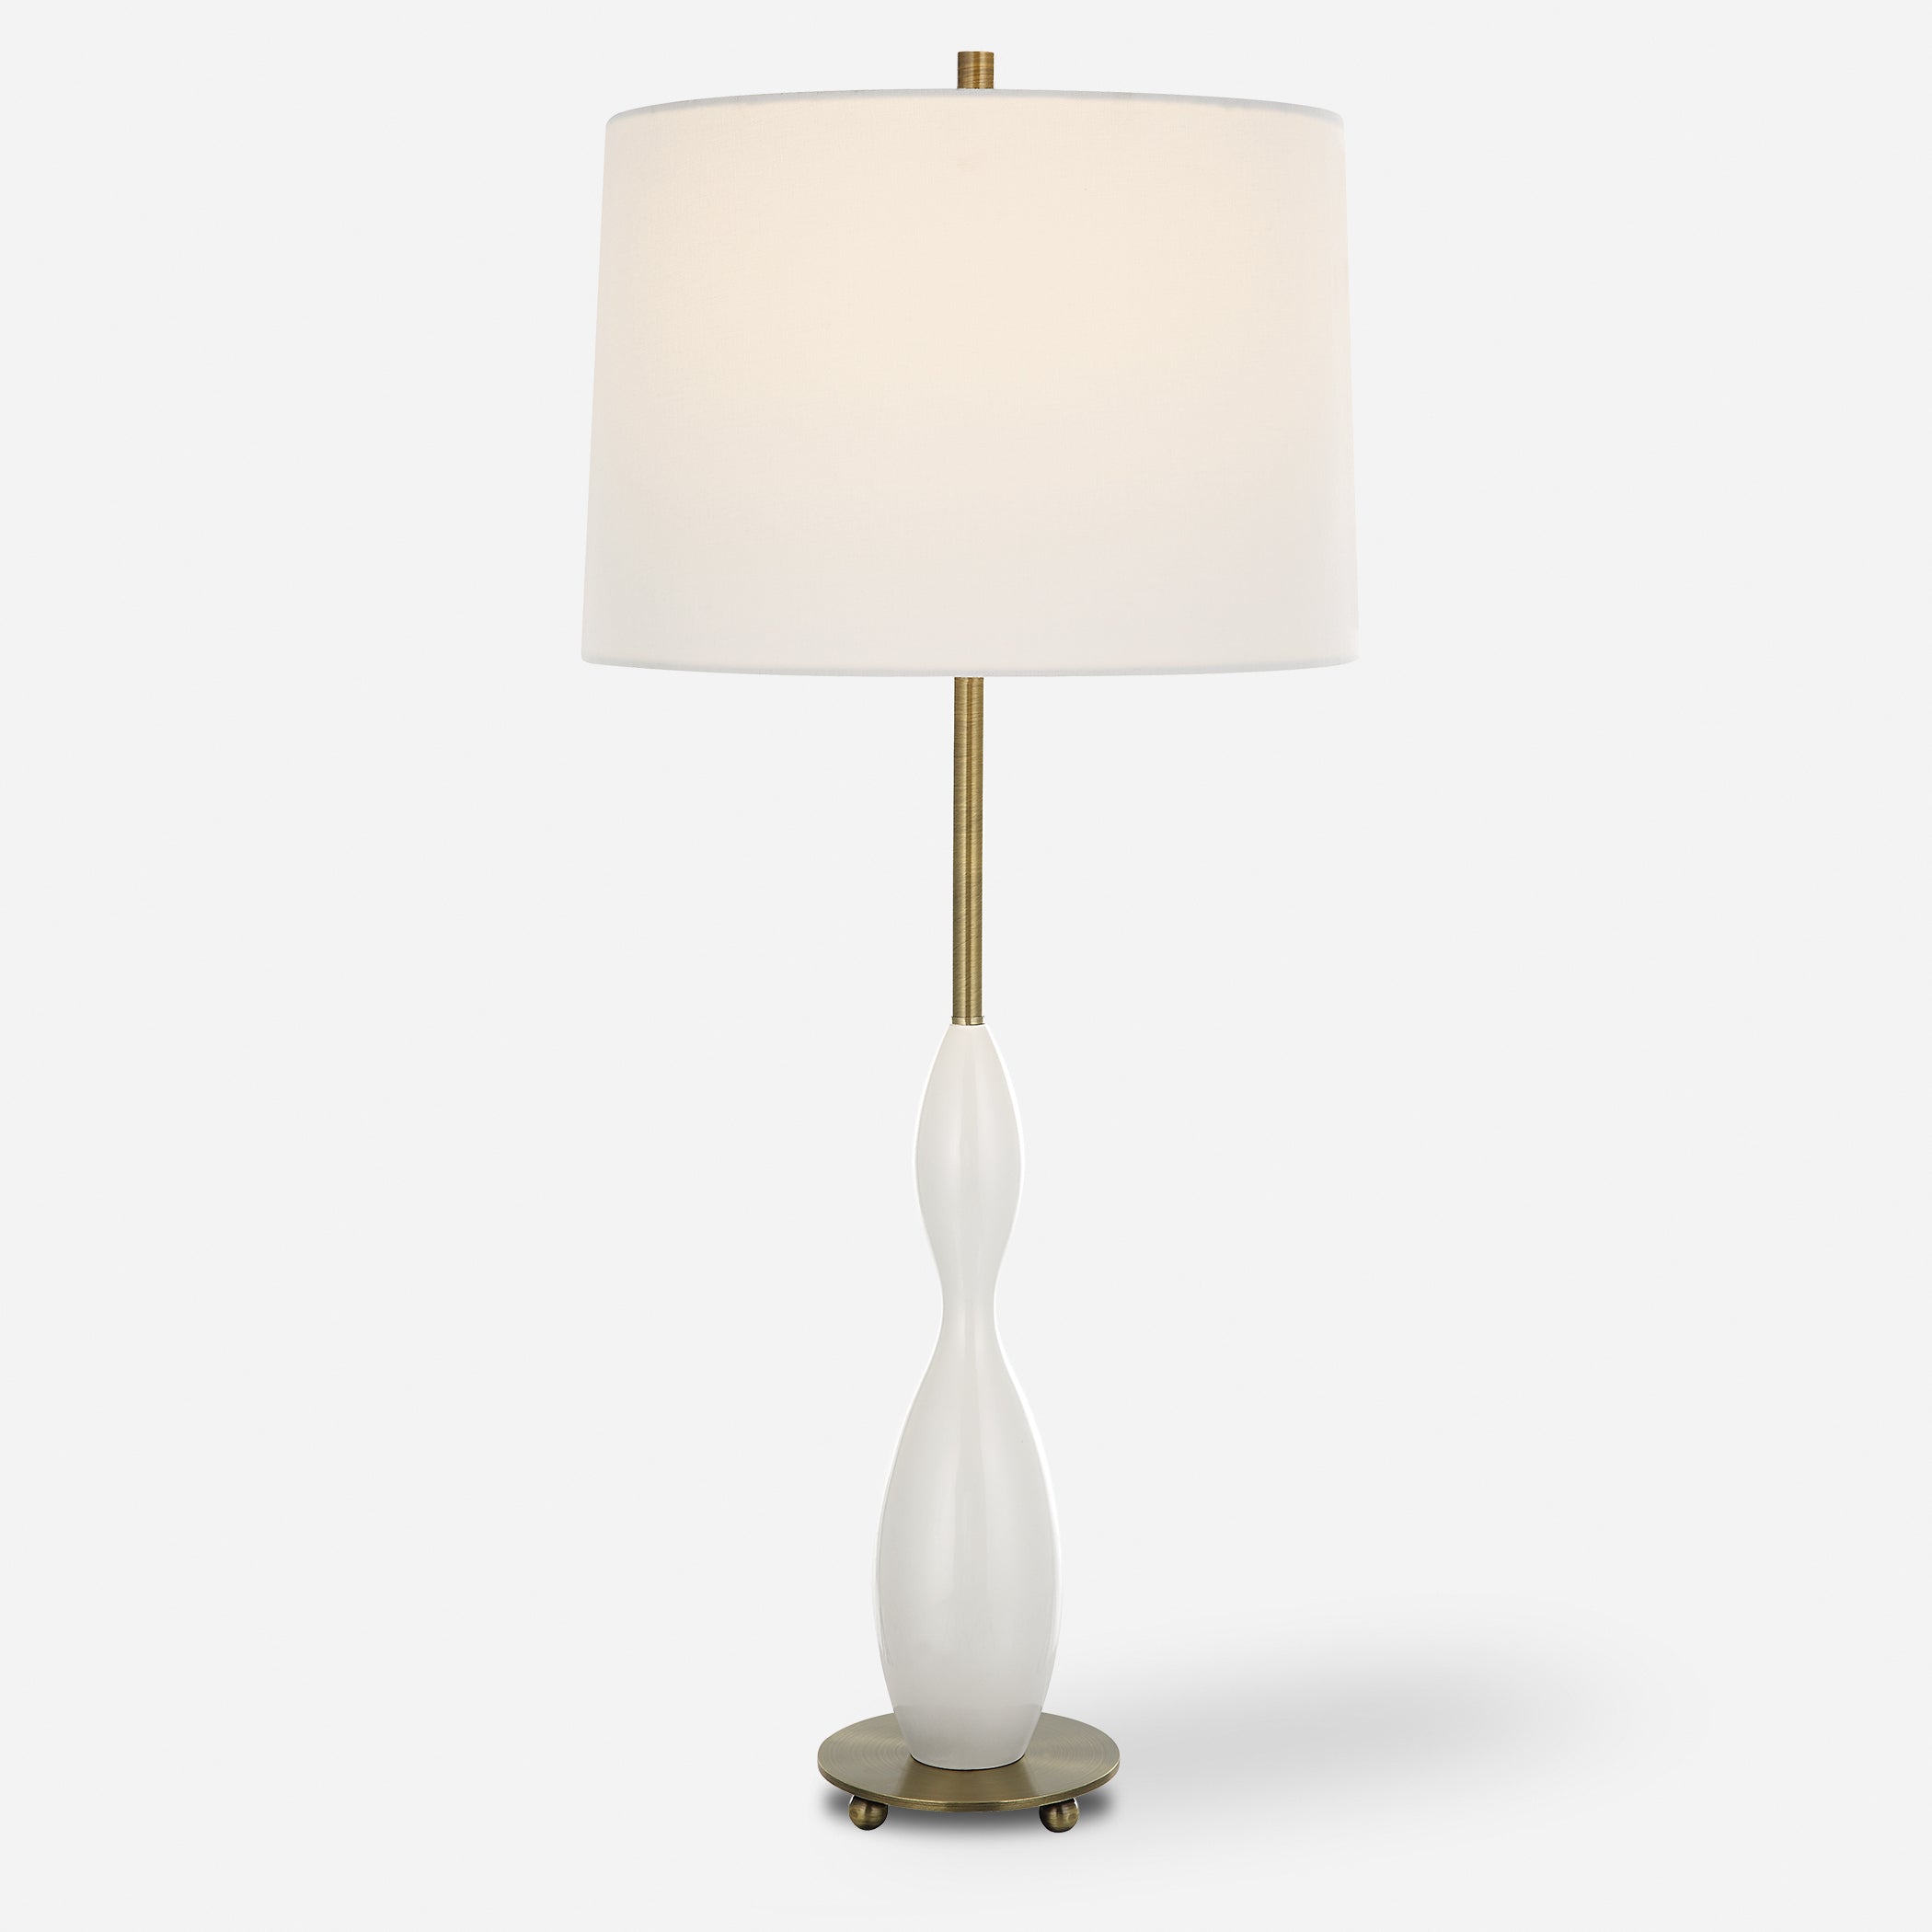 Uttermost Annora Glossy White Table Lamp Glossy White Table Lamp Uttermost   